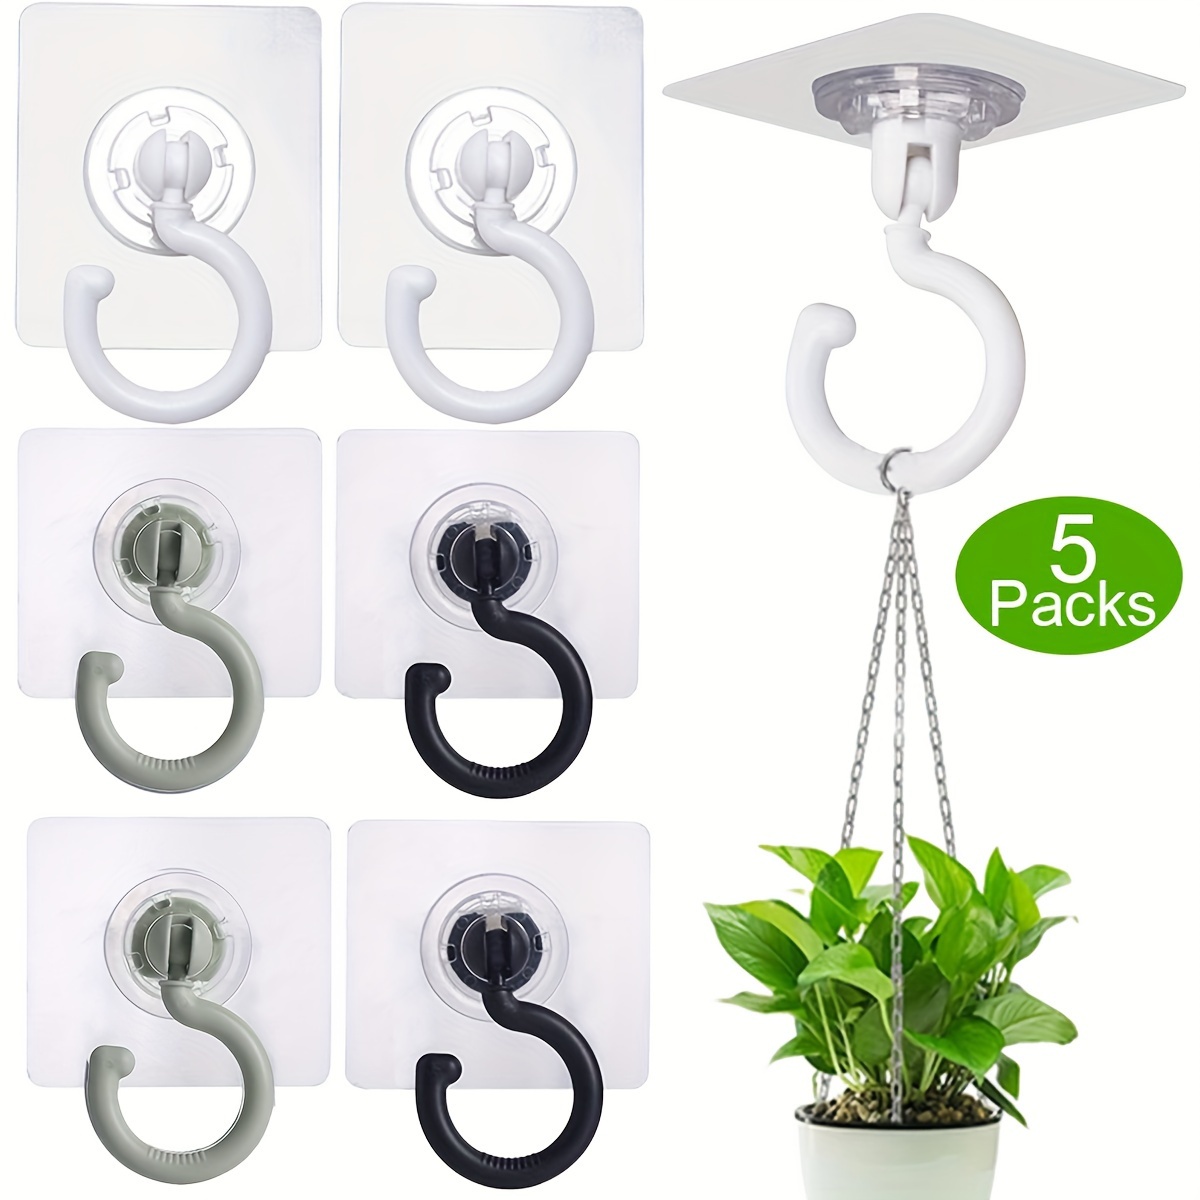 Adhesive Ceiling Hook, Adhesive Ceiling Hooks for Hanging Light Plants,  Without Drilling, Ceiling Hooks for Plants, Wind Chimes, Decorations,  Lights